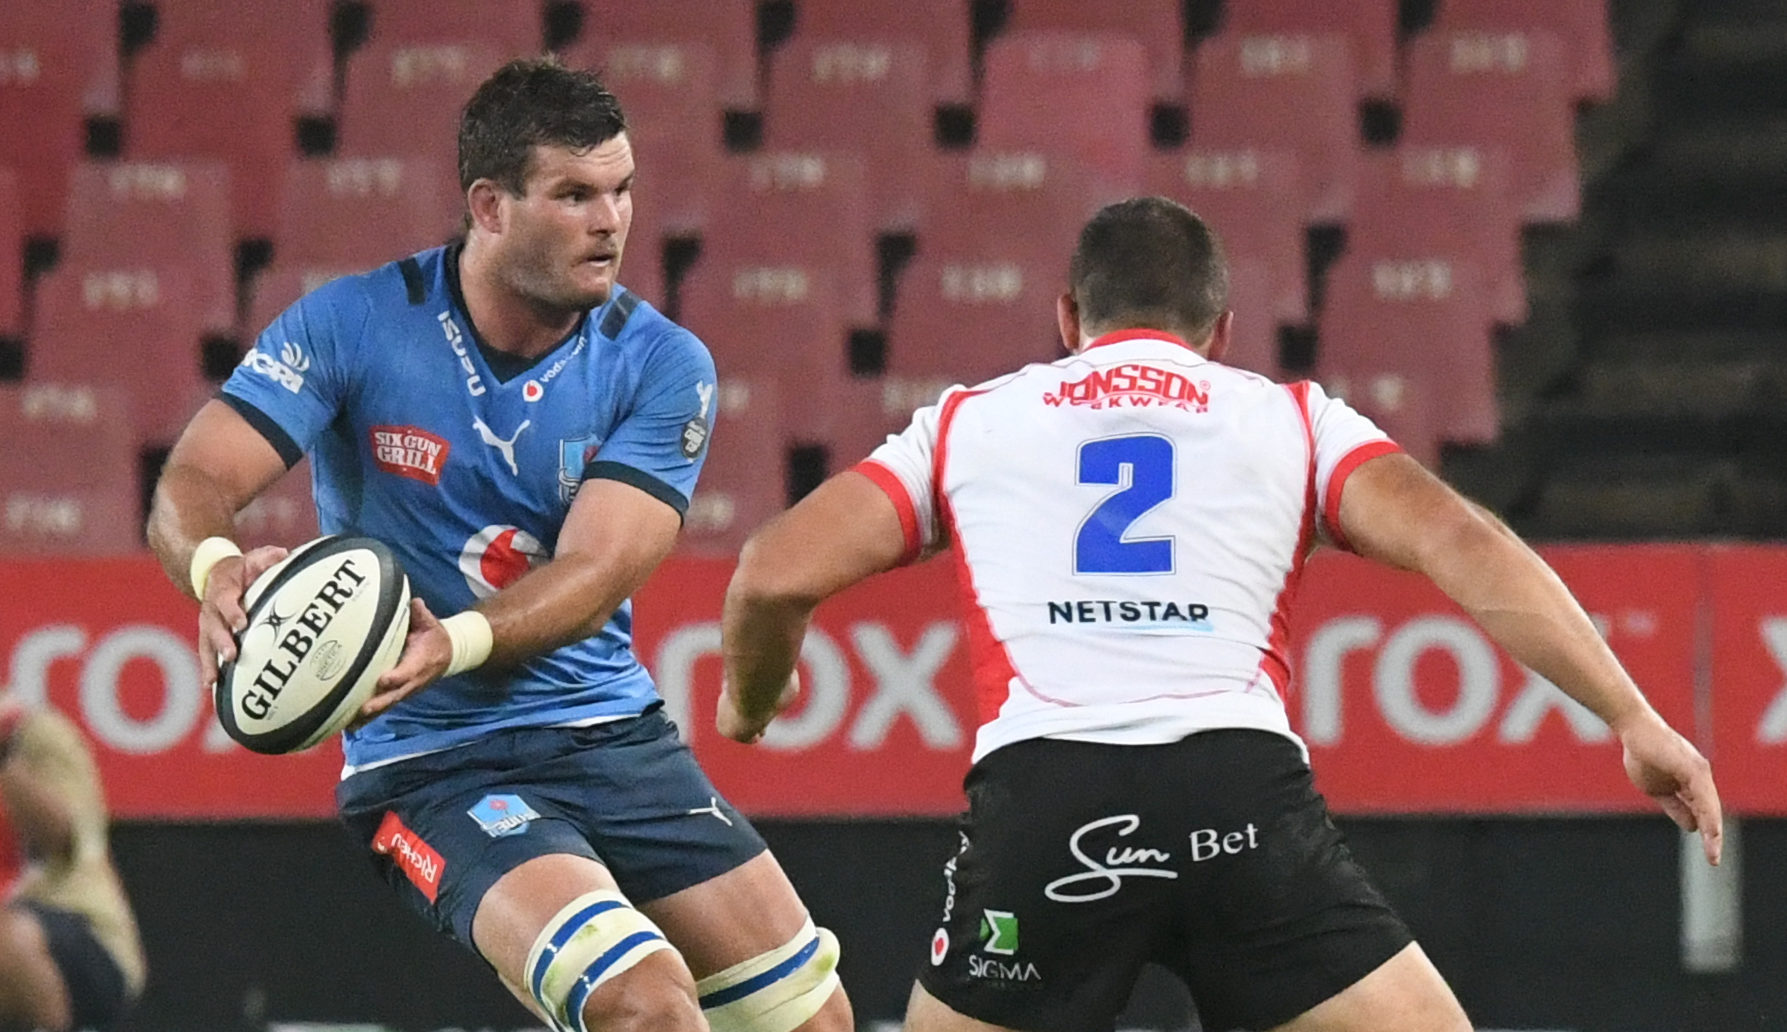 JOHANNESBURG, SOUTH AFRICA - MARCH 23: Muller Uys of the Bulls with the ball during the Carling Currie Cup match between Sigma Lions and Vodacom Bulls at Emirates Airline Park on March 23, 2022 in Johannesburg, South Africa. (Photo by Sydney Seshibedi/Gallo Images/BackpagePix)